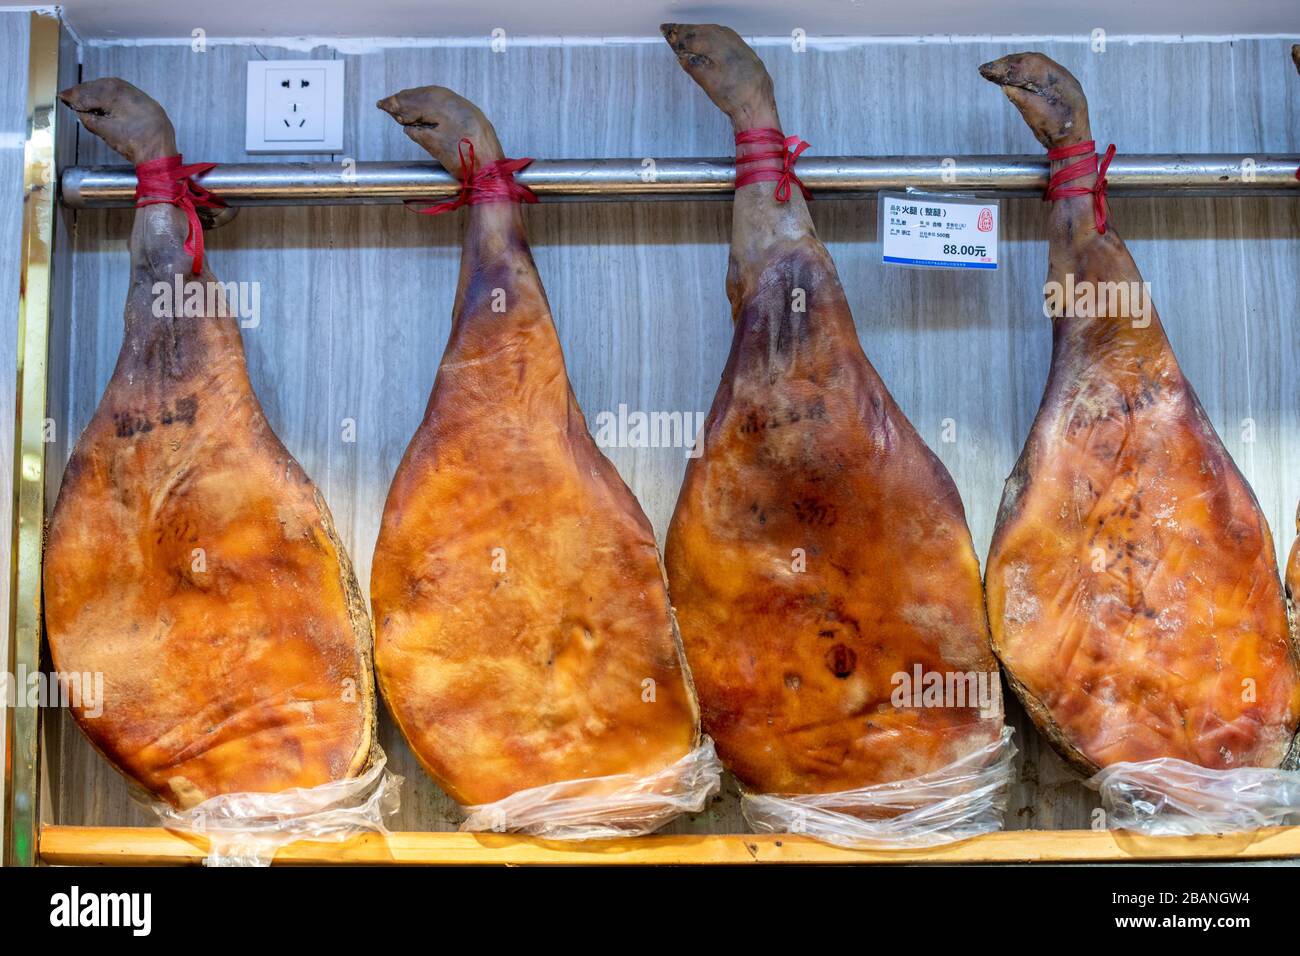 Hams on display for sale at a local market in Shanghai, China Stock Photo